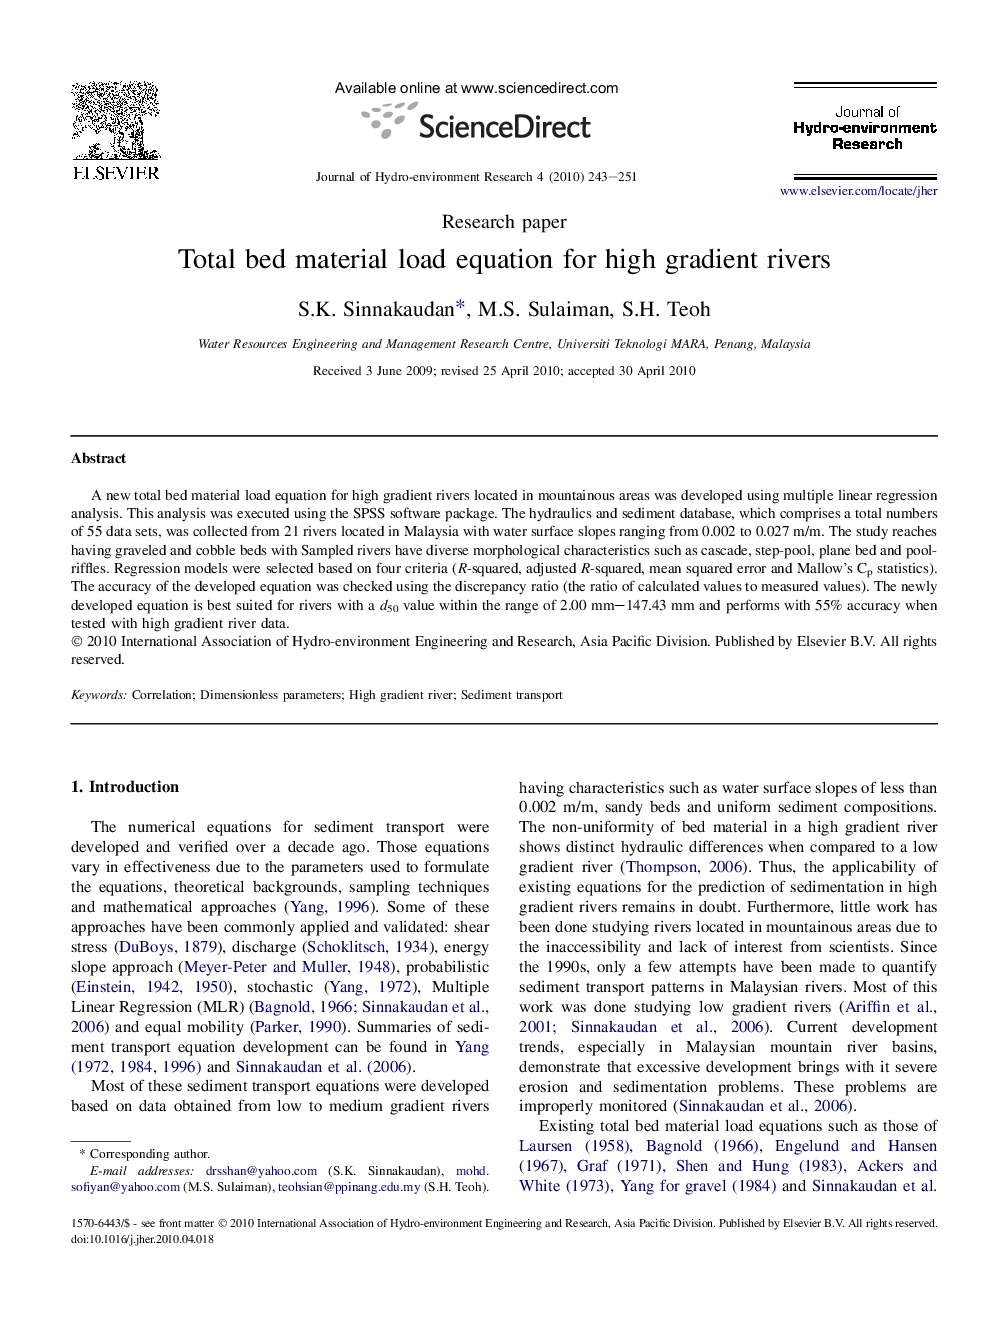 Total bed material load equation for high gradient rivers